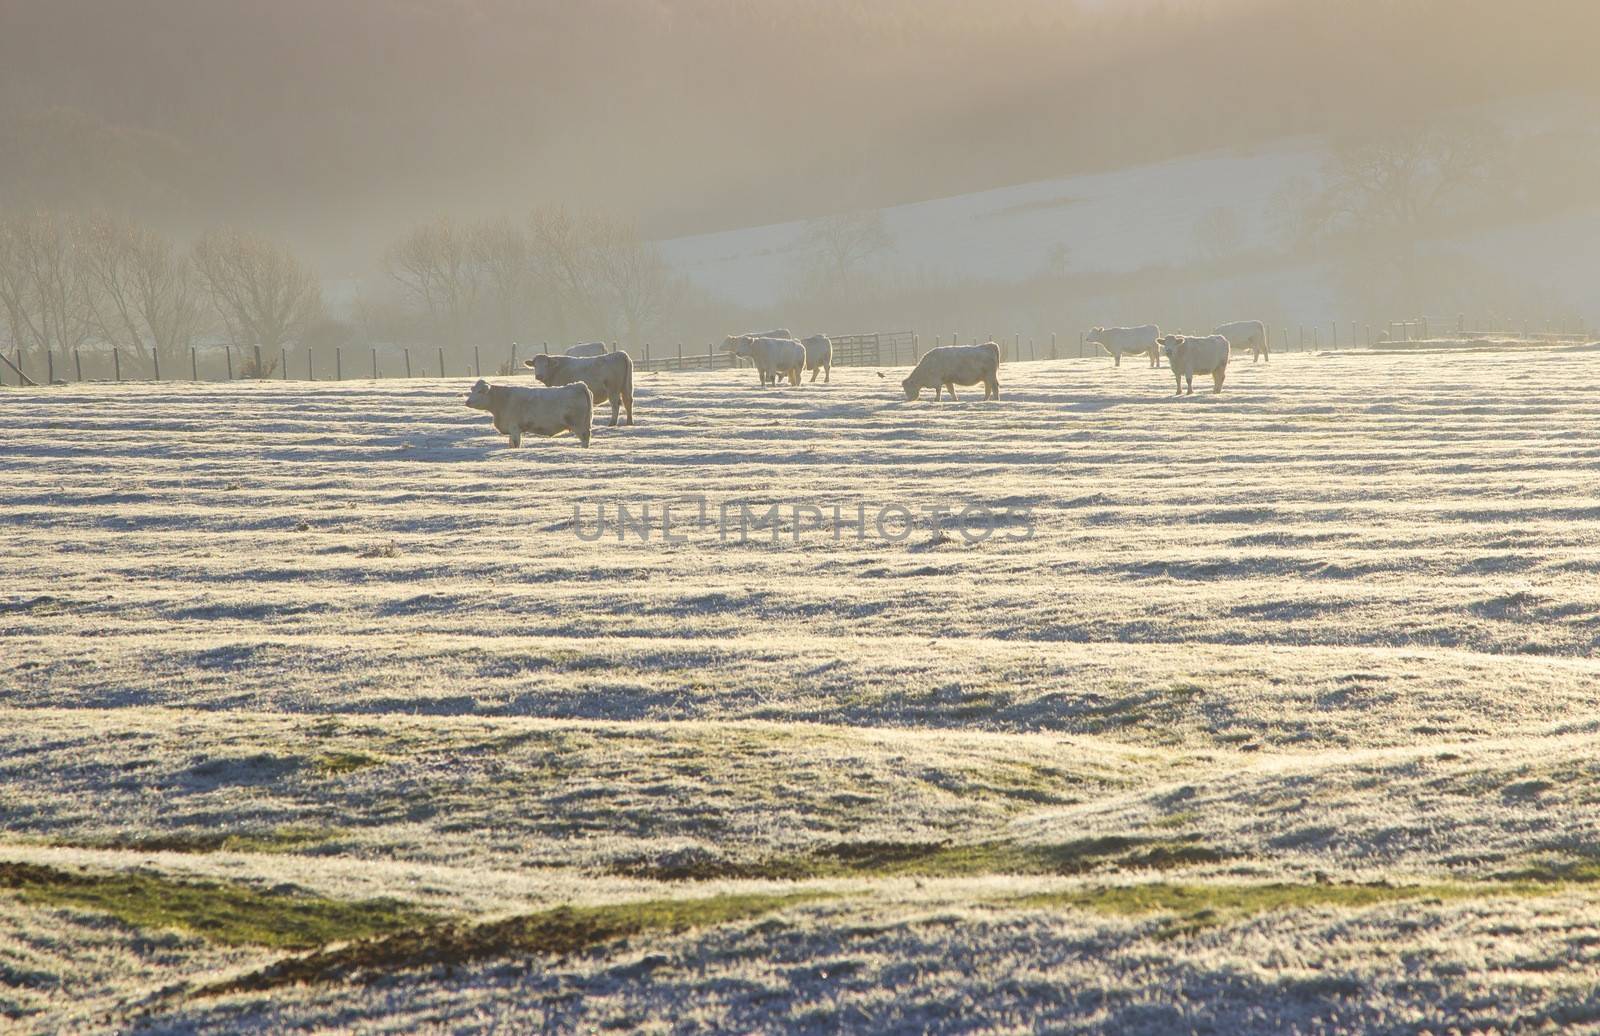 Cattle on a frosty morning in the Cotswolds, Weston Subedge near Chipping Campden, Gloucestershire, England.